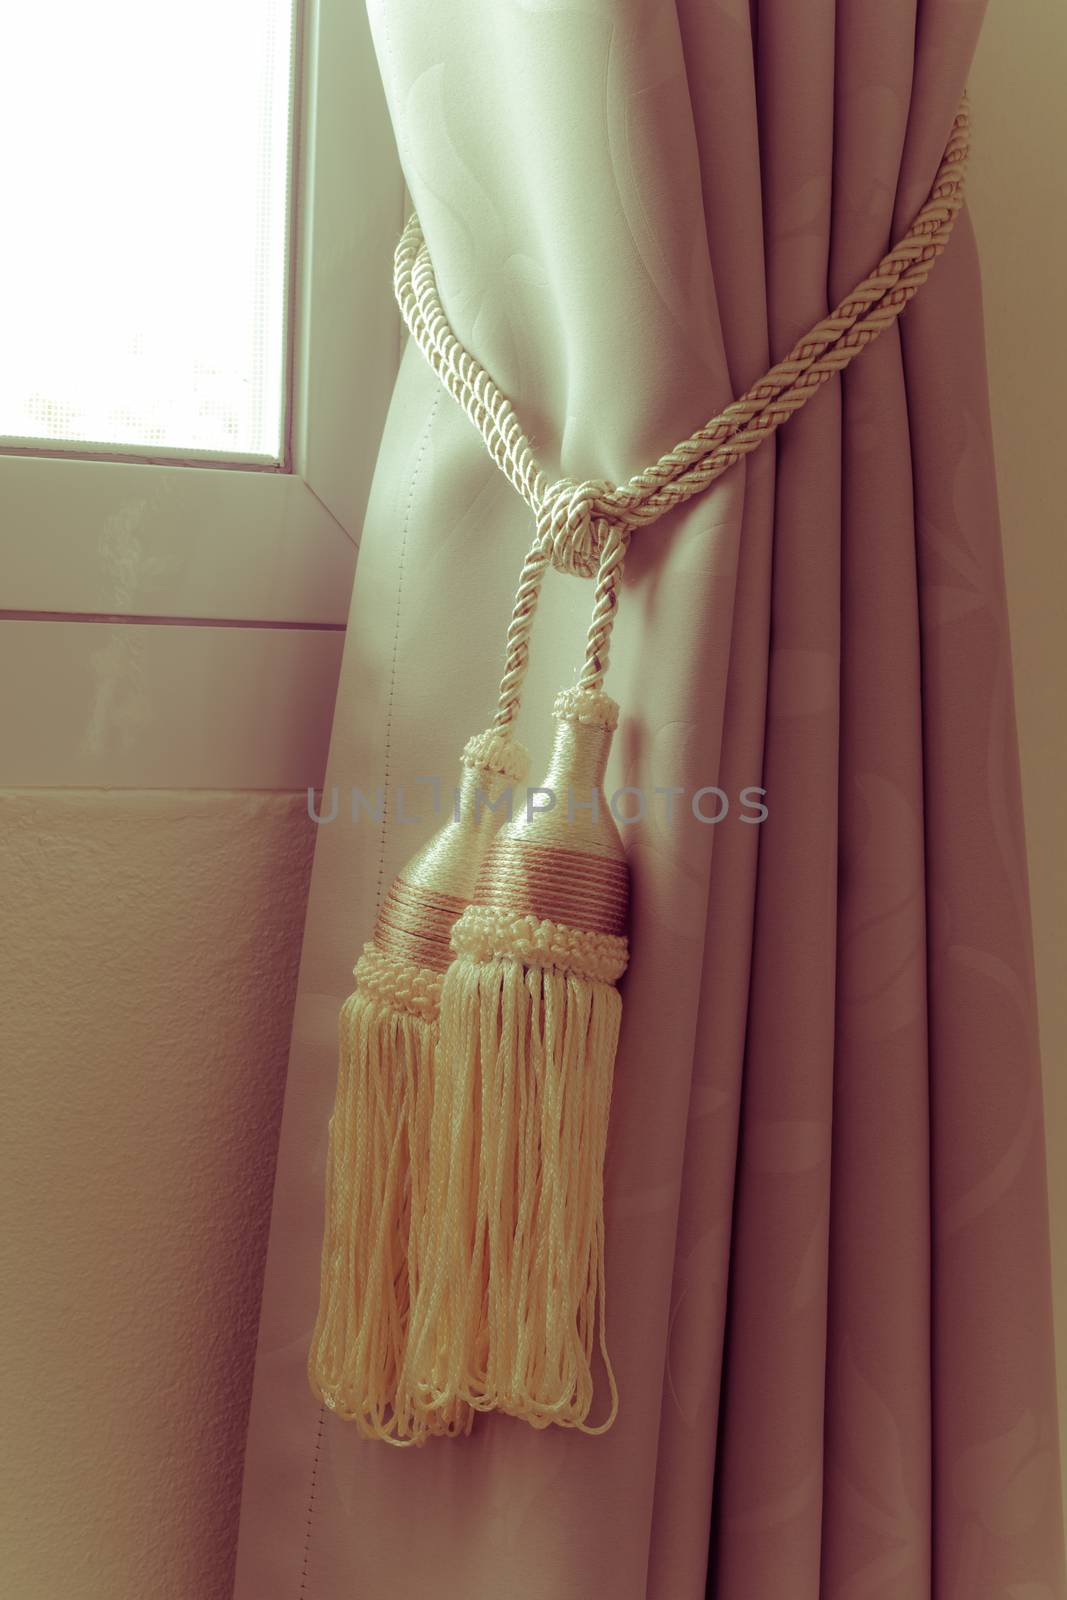 Curtains tassel with rope by the window on the left, vintage retro style.